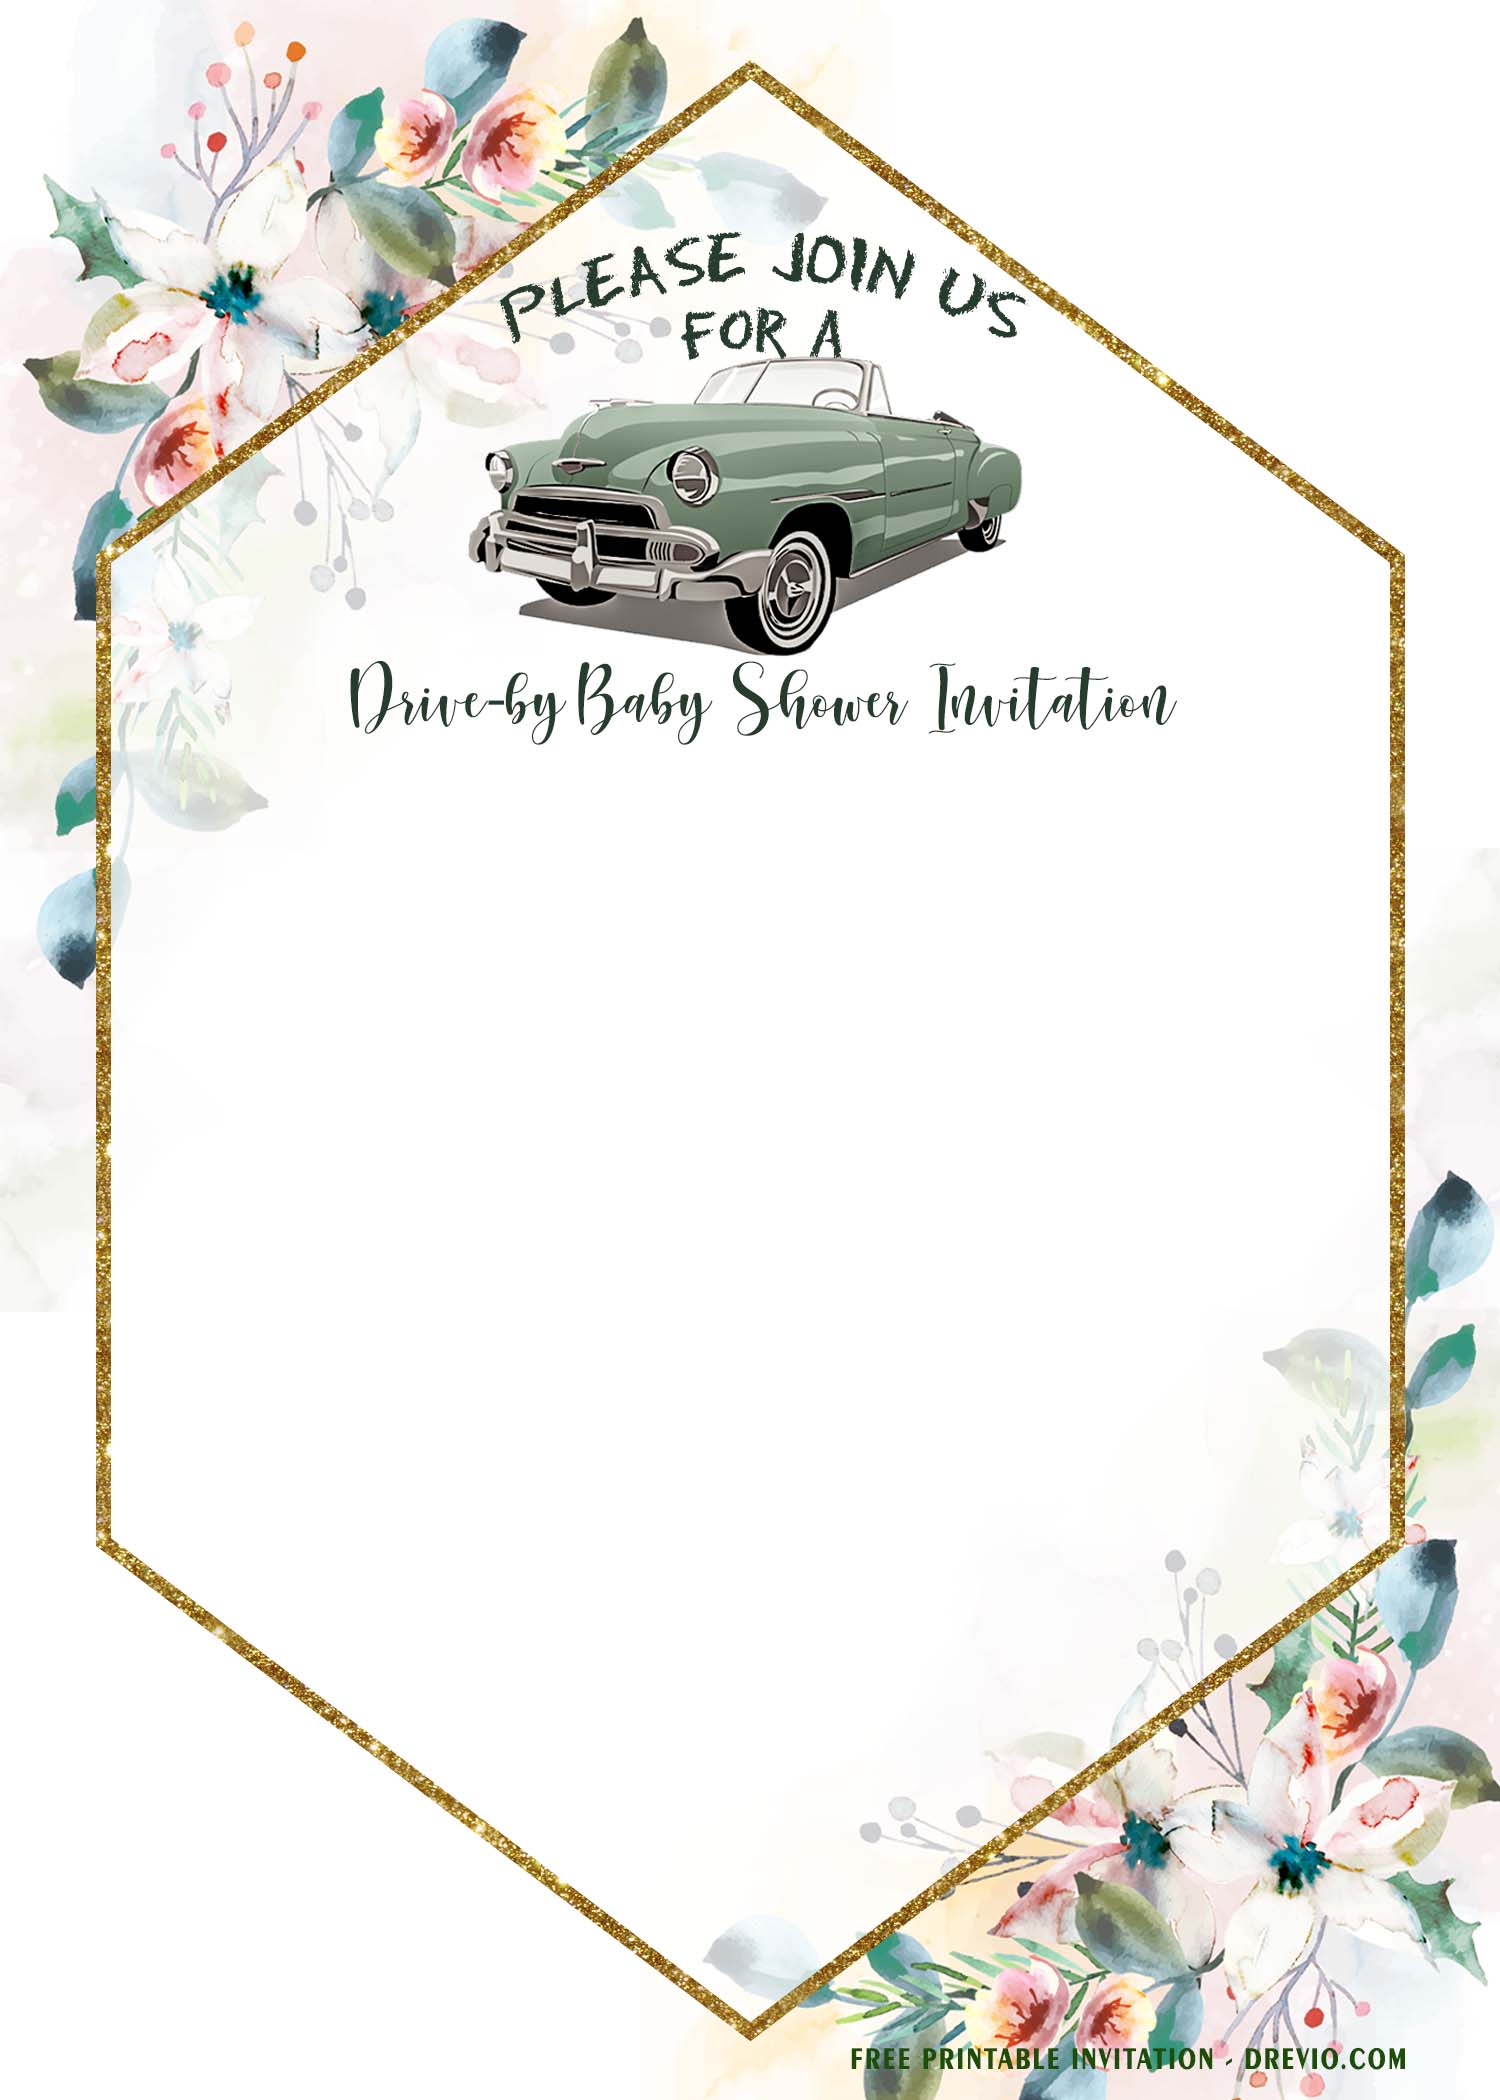 Free Printable Greenery Vintage Drive By Party Invitation Templates Download Hundreds Free Printable Birthday Invitation Templates